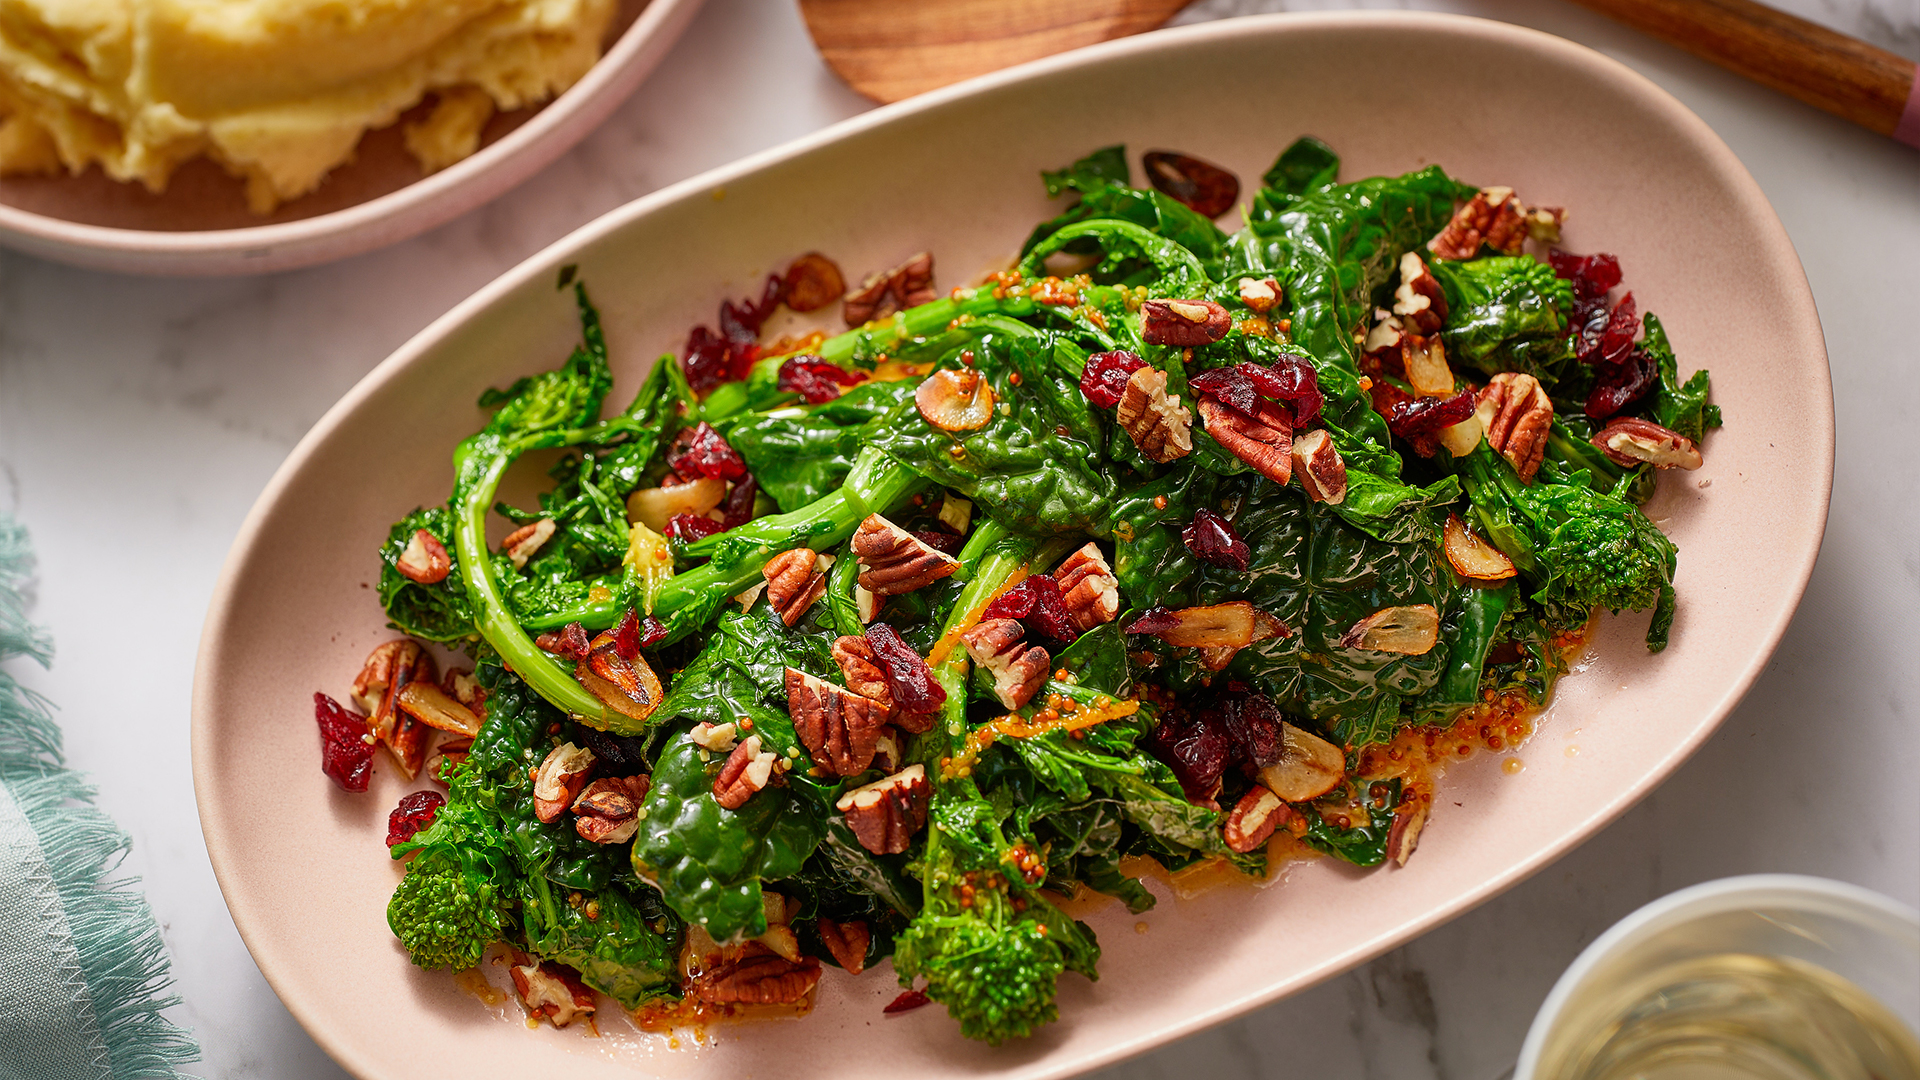 Sauteed greens with cranberry and pecans